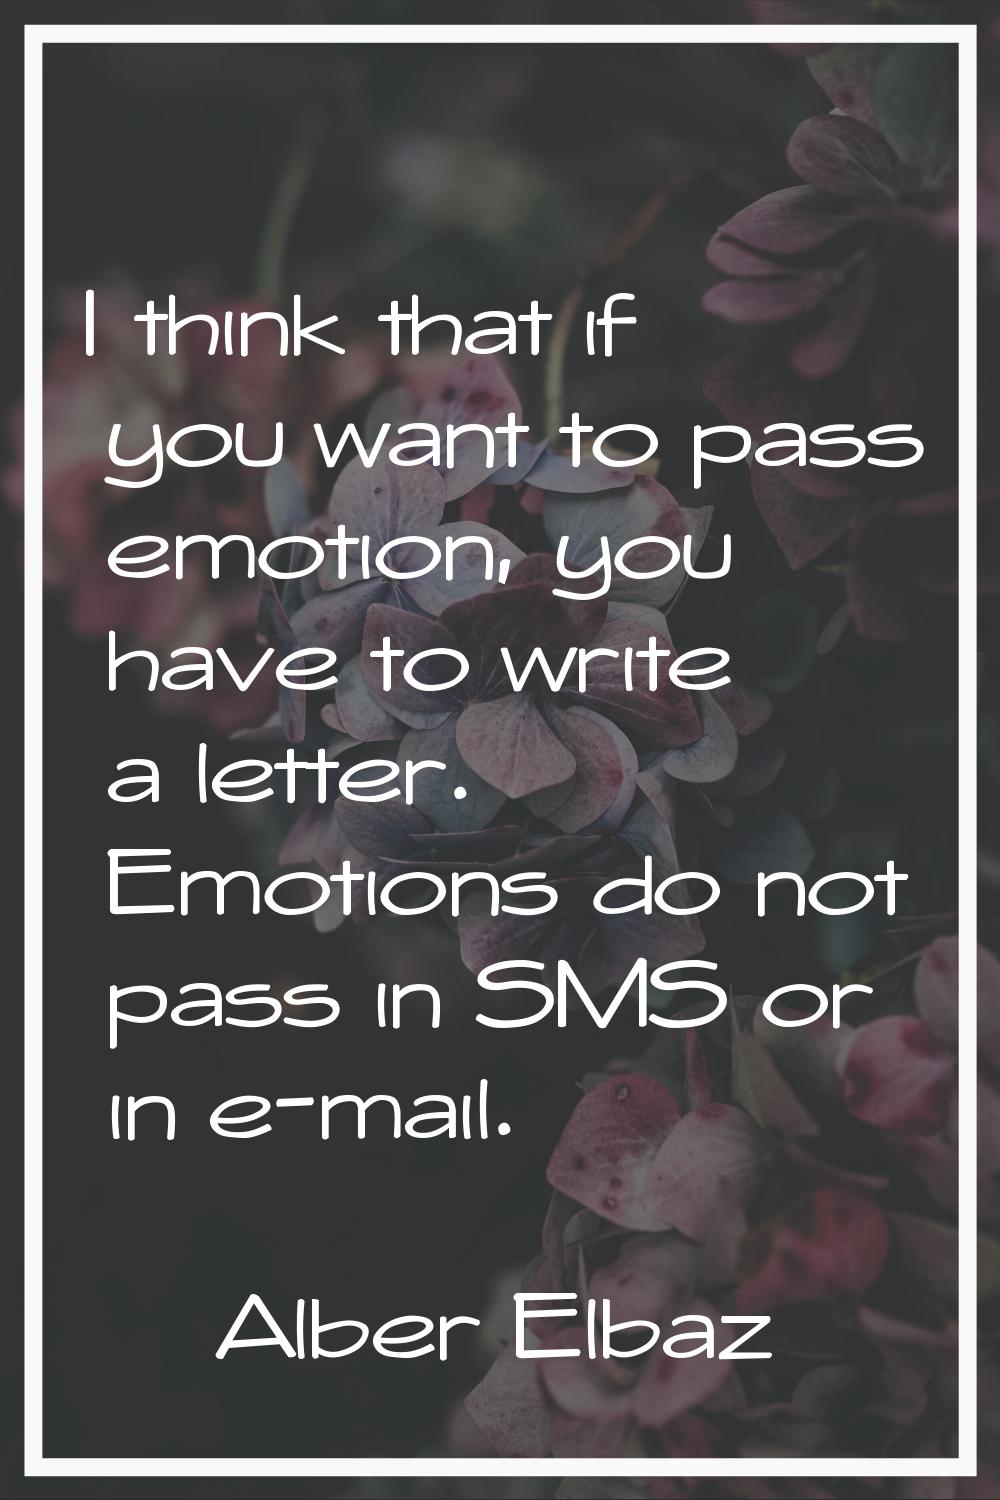 I think that if you want to pass emotion, you have to write a letter. Emotions do not pass in SMS o